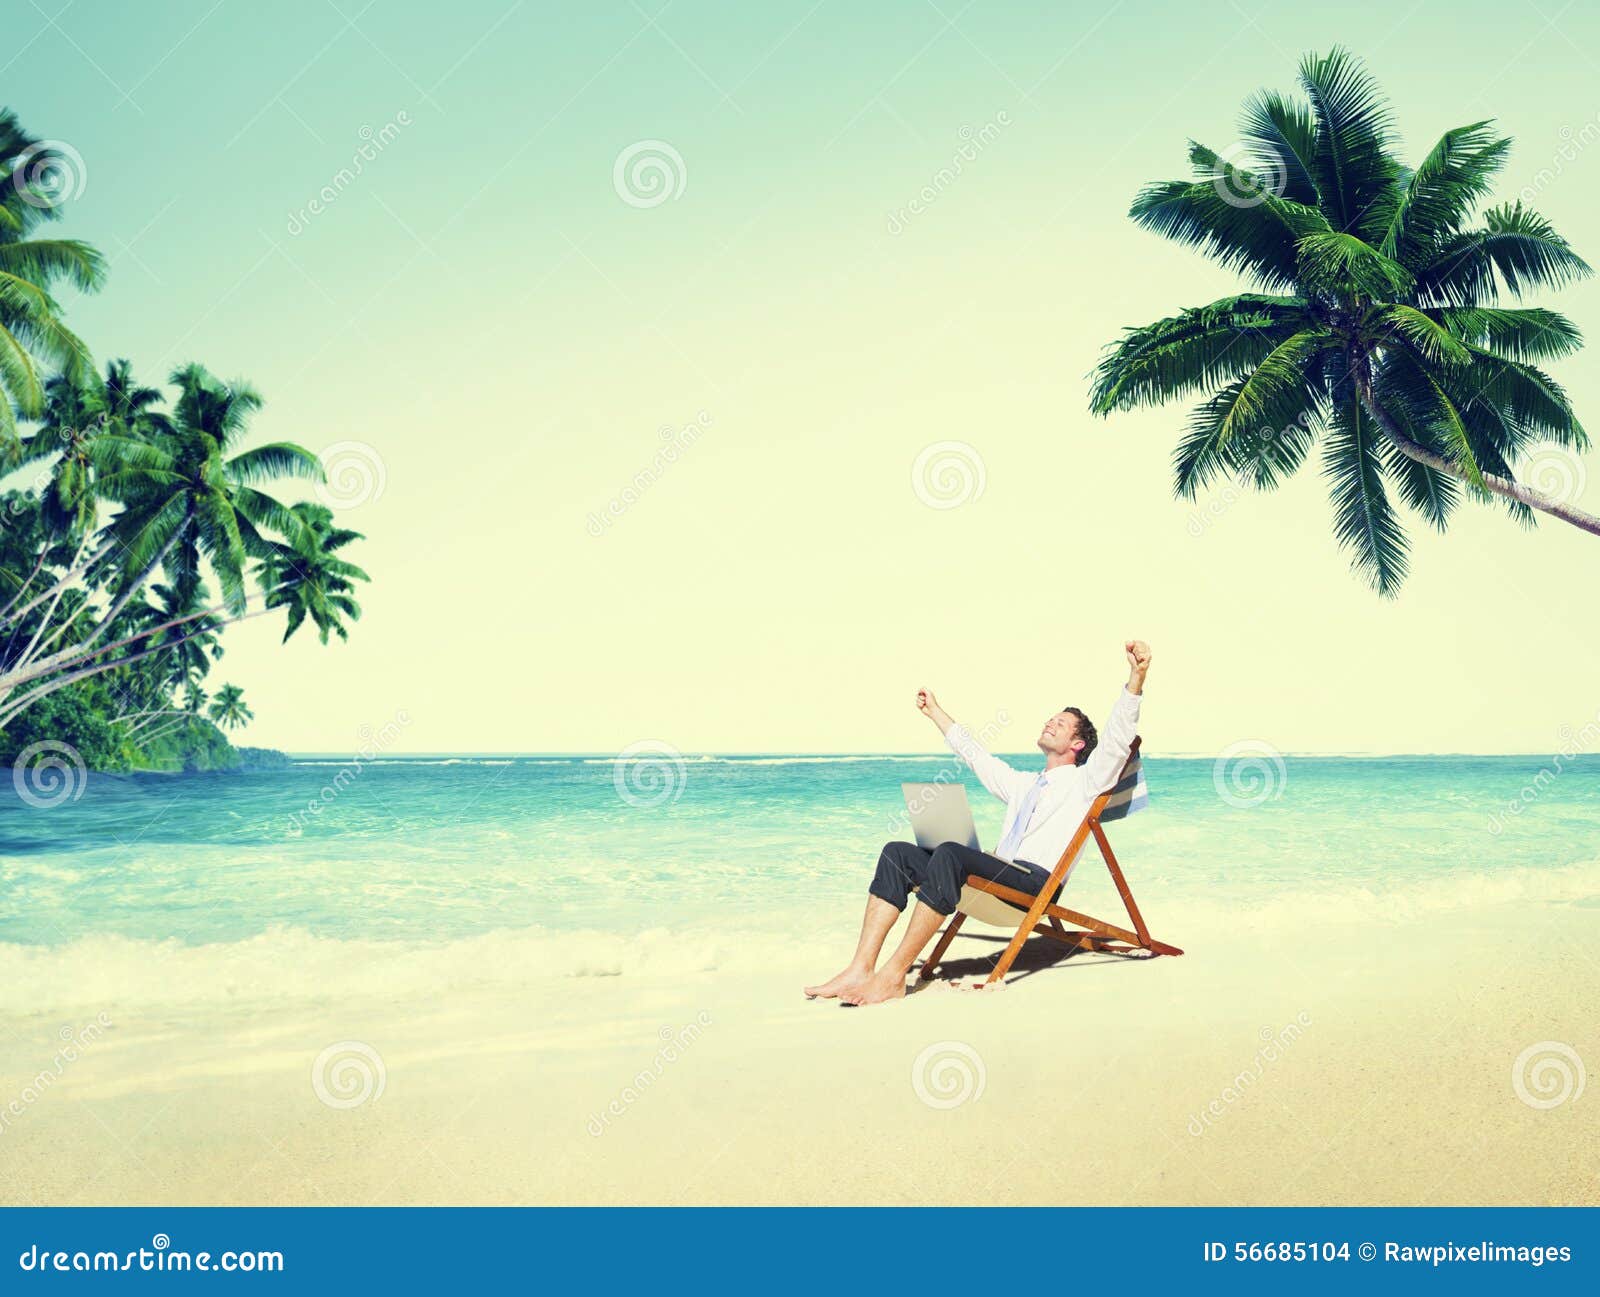 businessman relaxation holiday travel destination concept